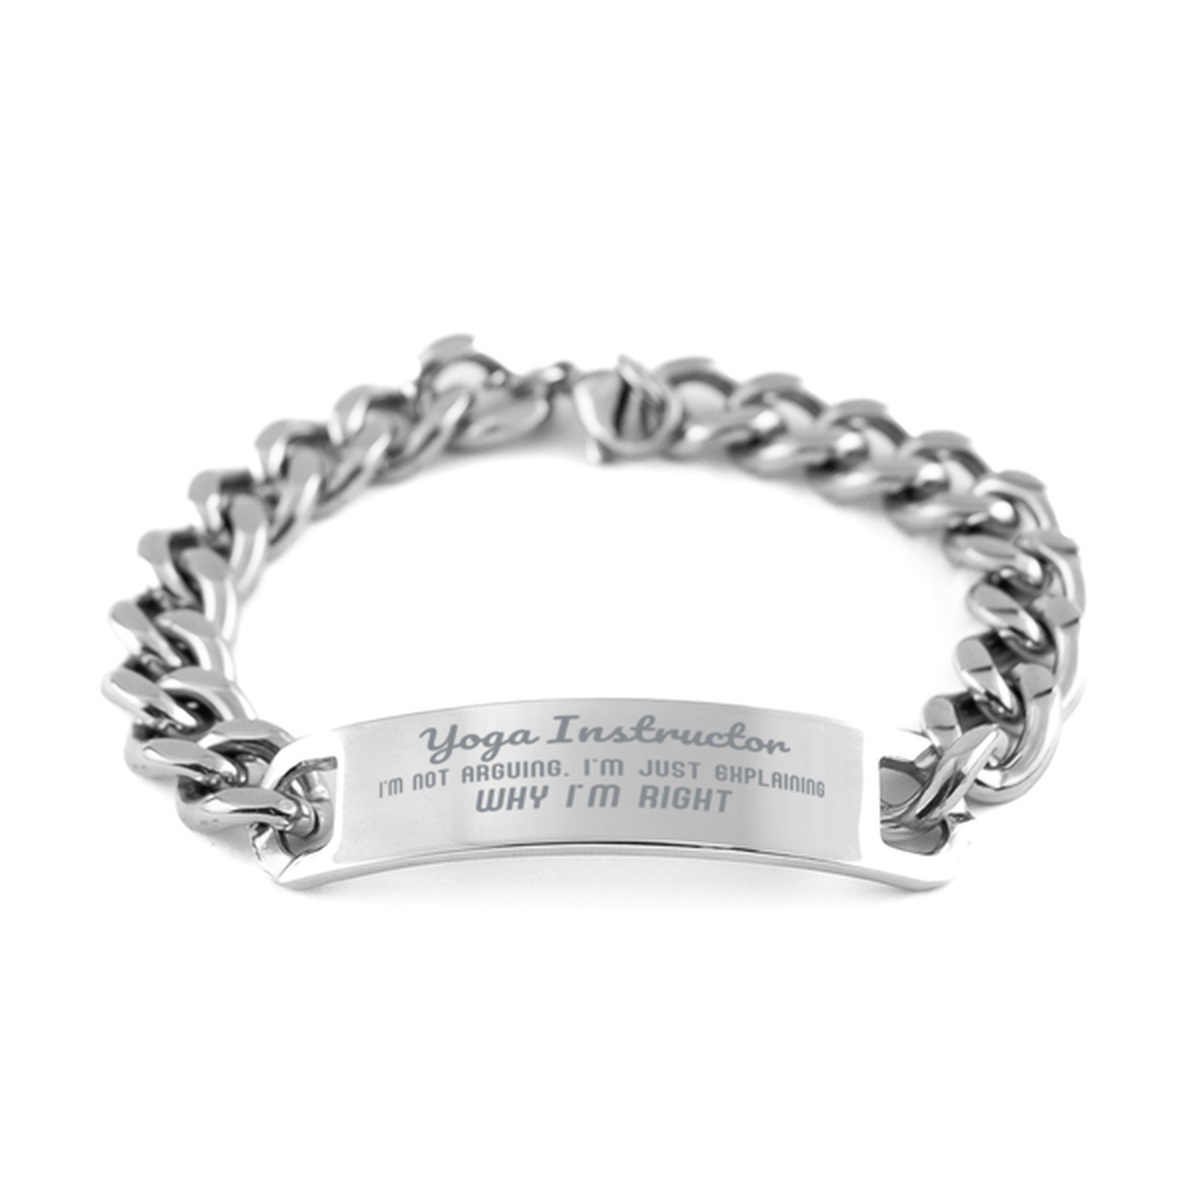 Yoga Instructor I'm not Arguing. I'm Just Explaining Why I'm RIGHT Cuban Chain Stainless Steel Bracelet, Graduation Birthday Christmas Yoga Instructor Gifts For Yoga Instructor Funny Saying Quote Present for Men Women Coworker